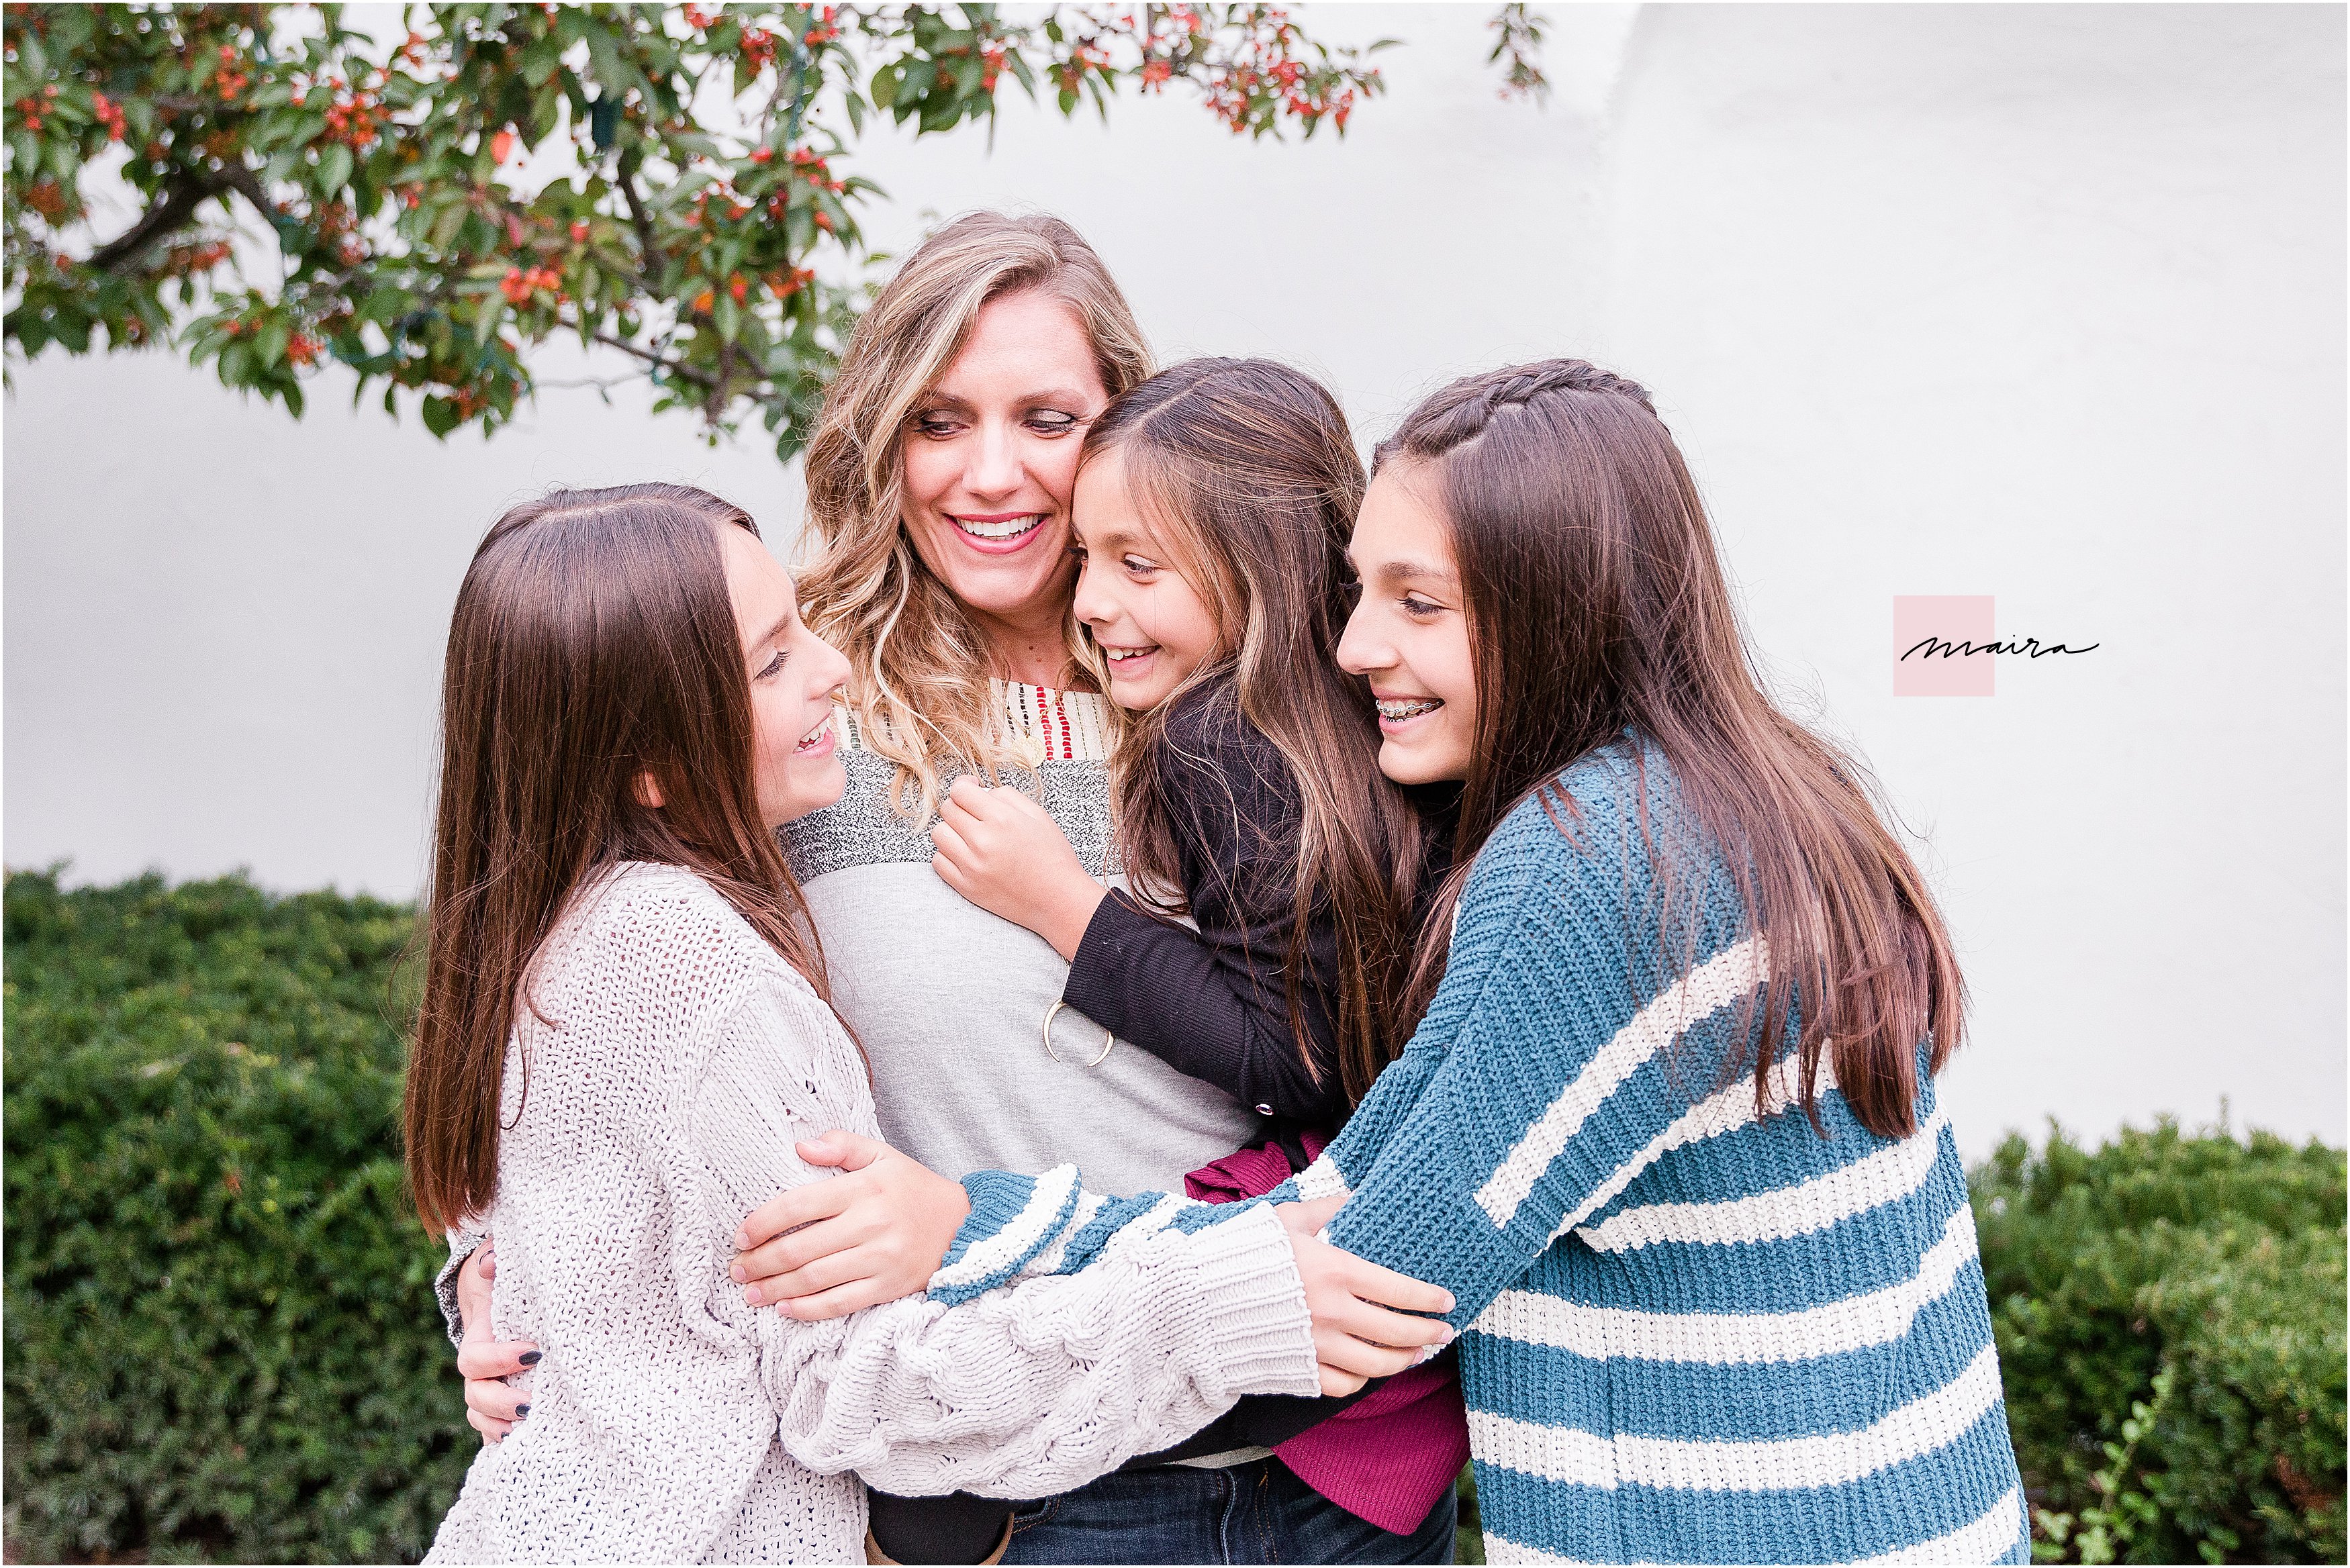 Beautiful Family Session in Adler Park, Libertyville, IL Mother and her four sweet daughters